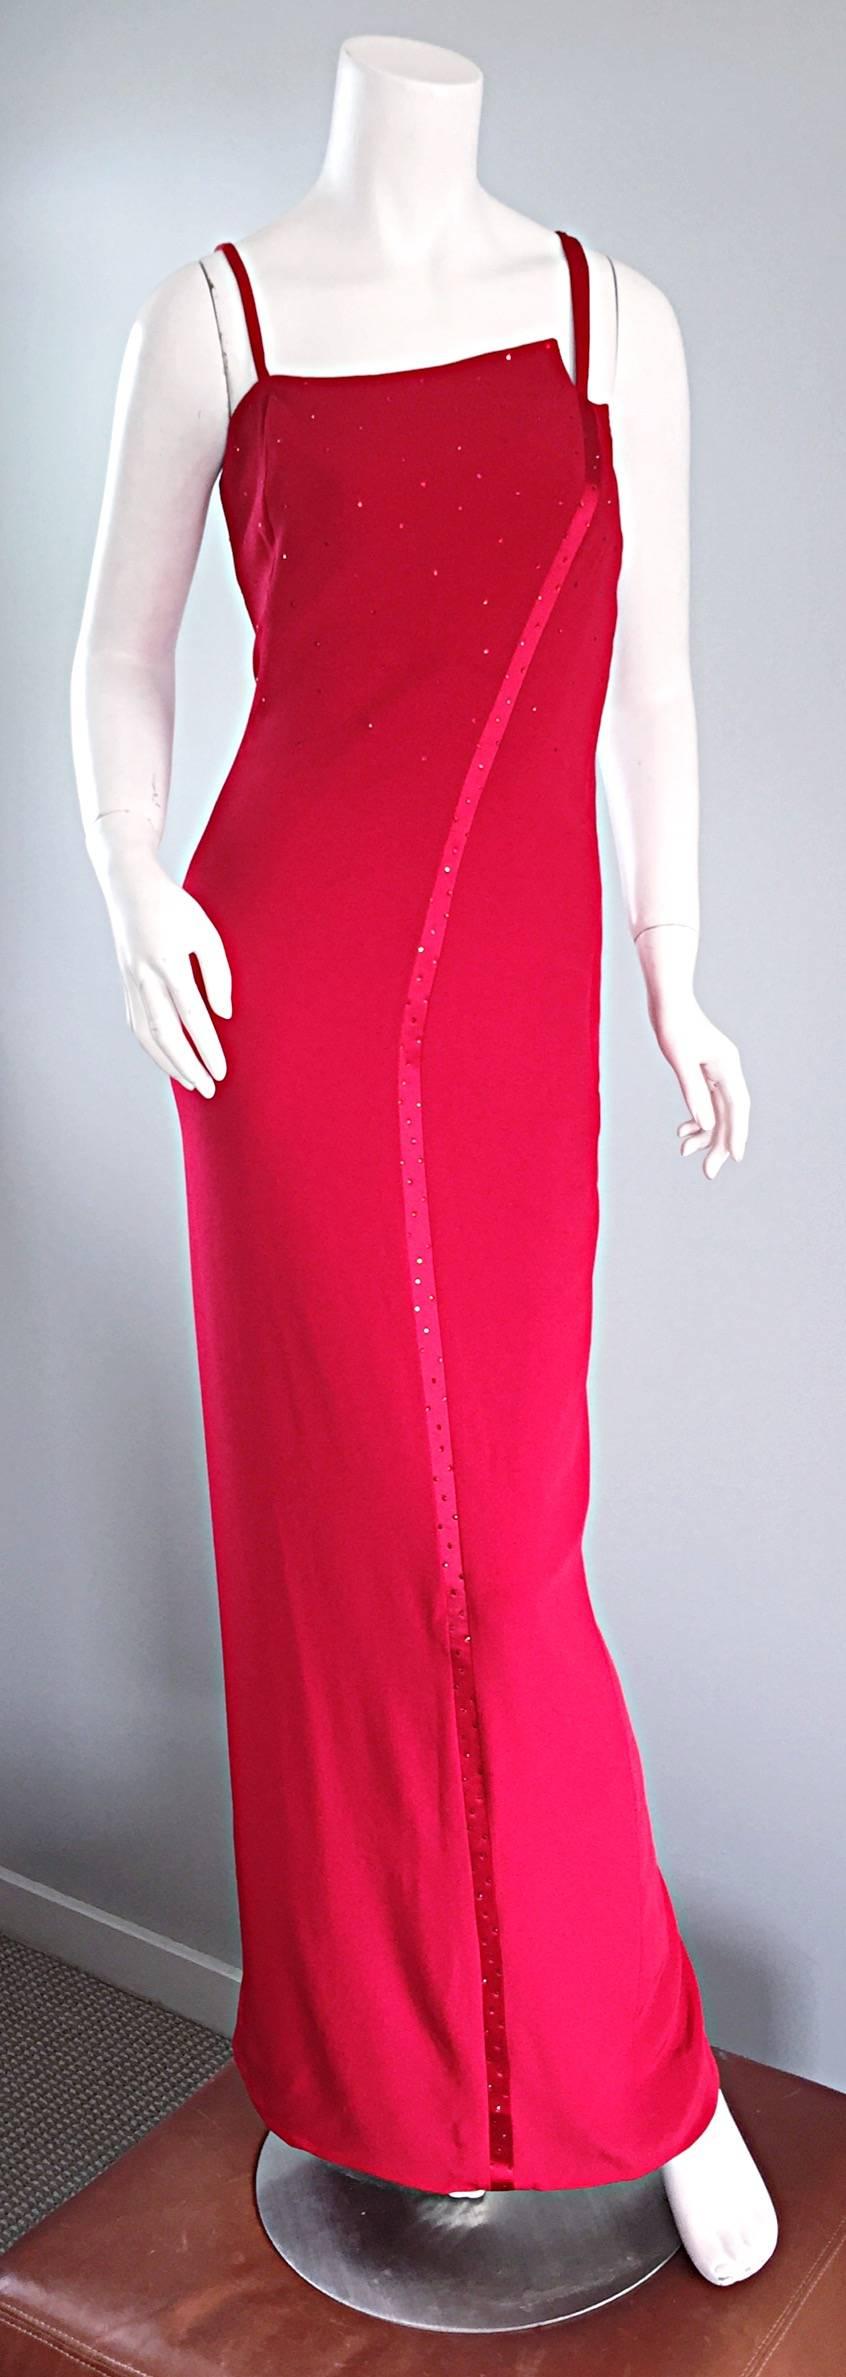 Sexy 1990s Lane Davis Size 8 Beverly Hills Hand Made Red Avant Garde Dress In Excellent Condition For Sale In San Diego, CA